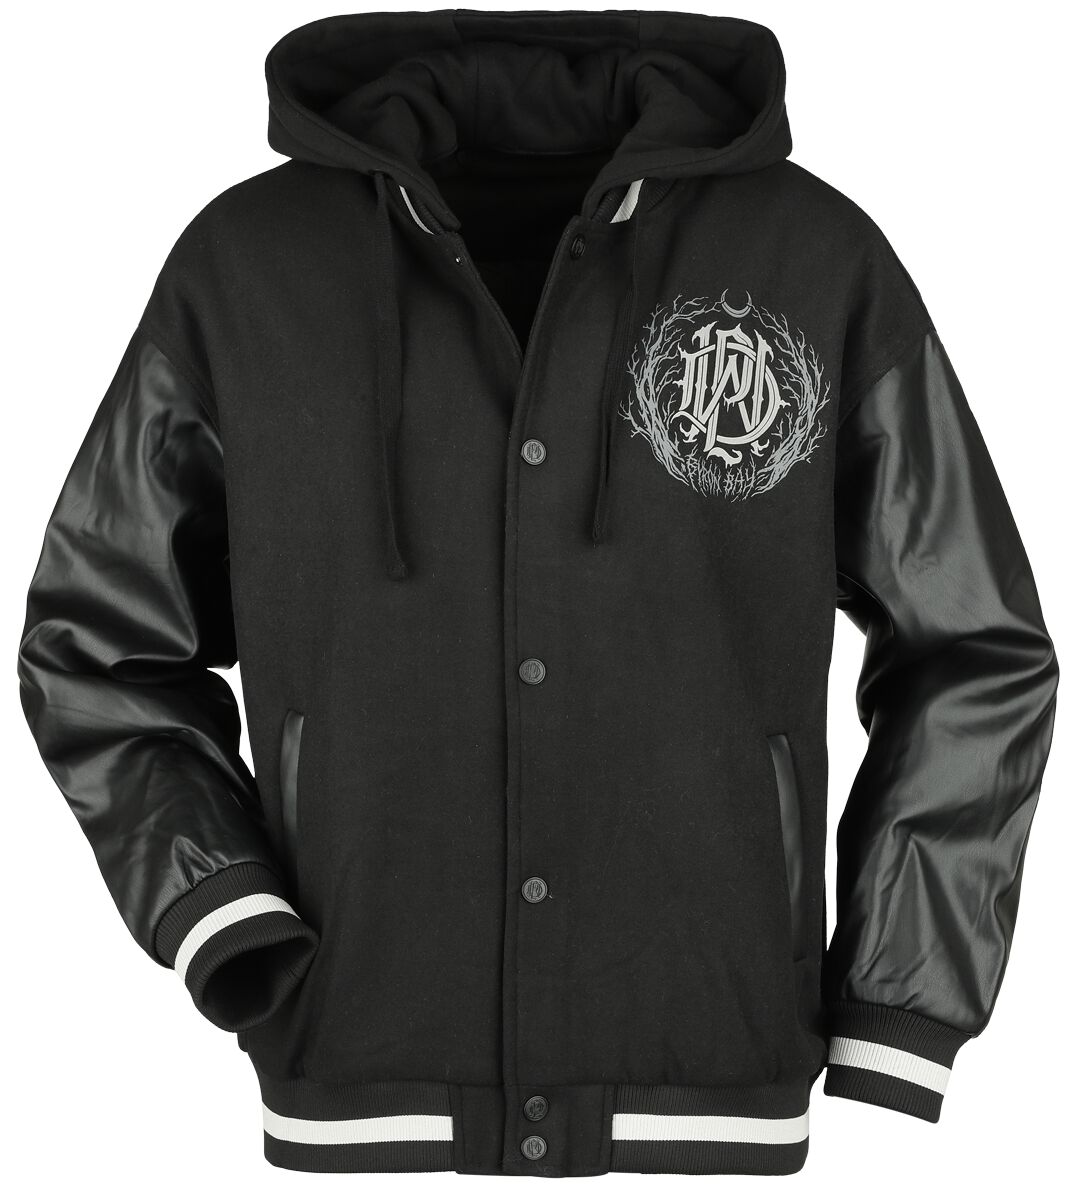 Parkway Drive EMP Signature Collection Collegejacke schwarz grau in XL